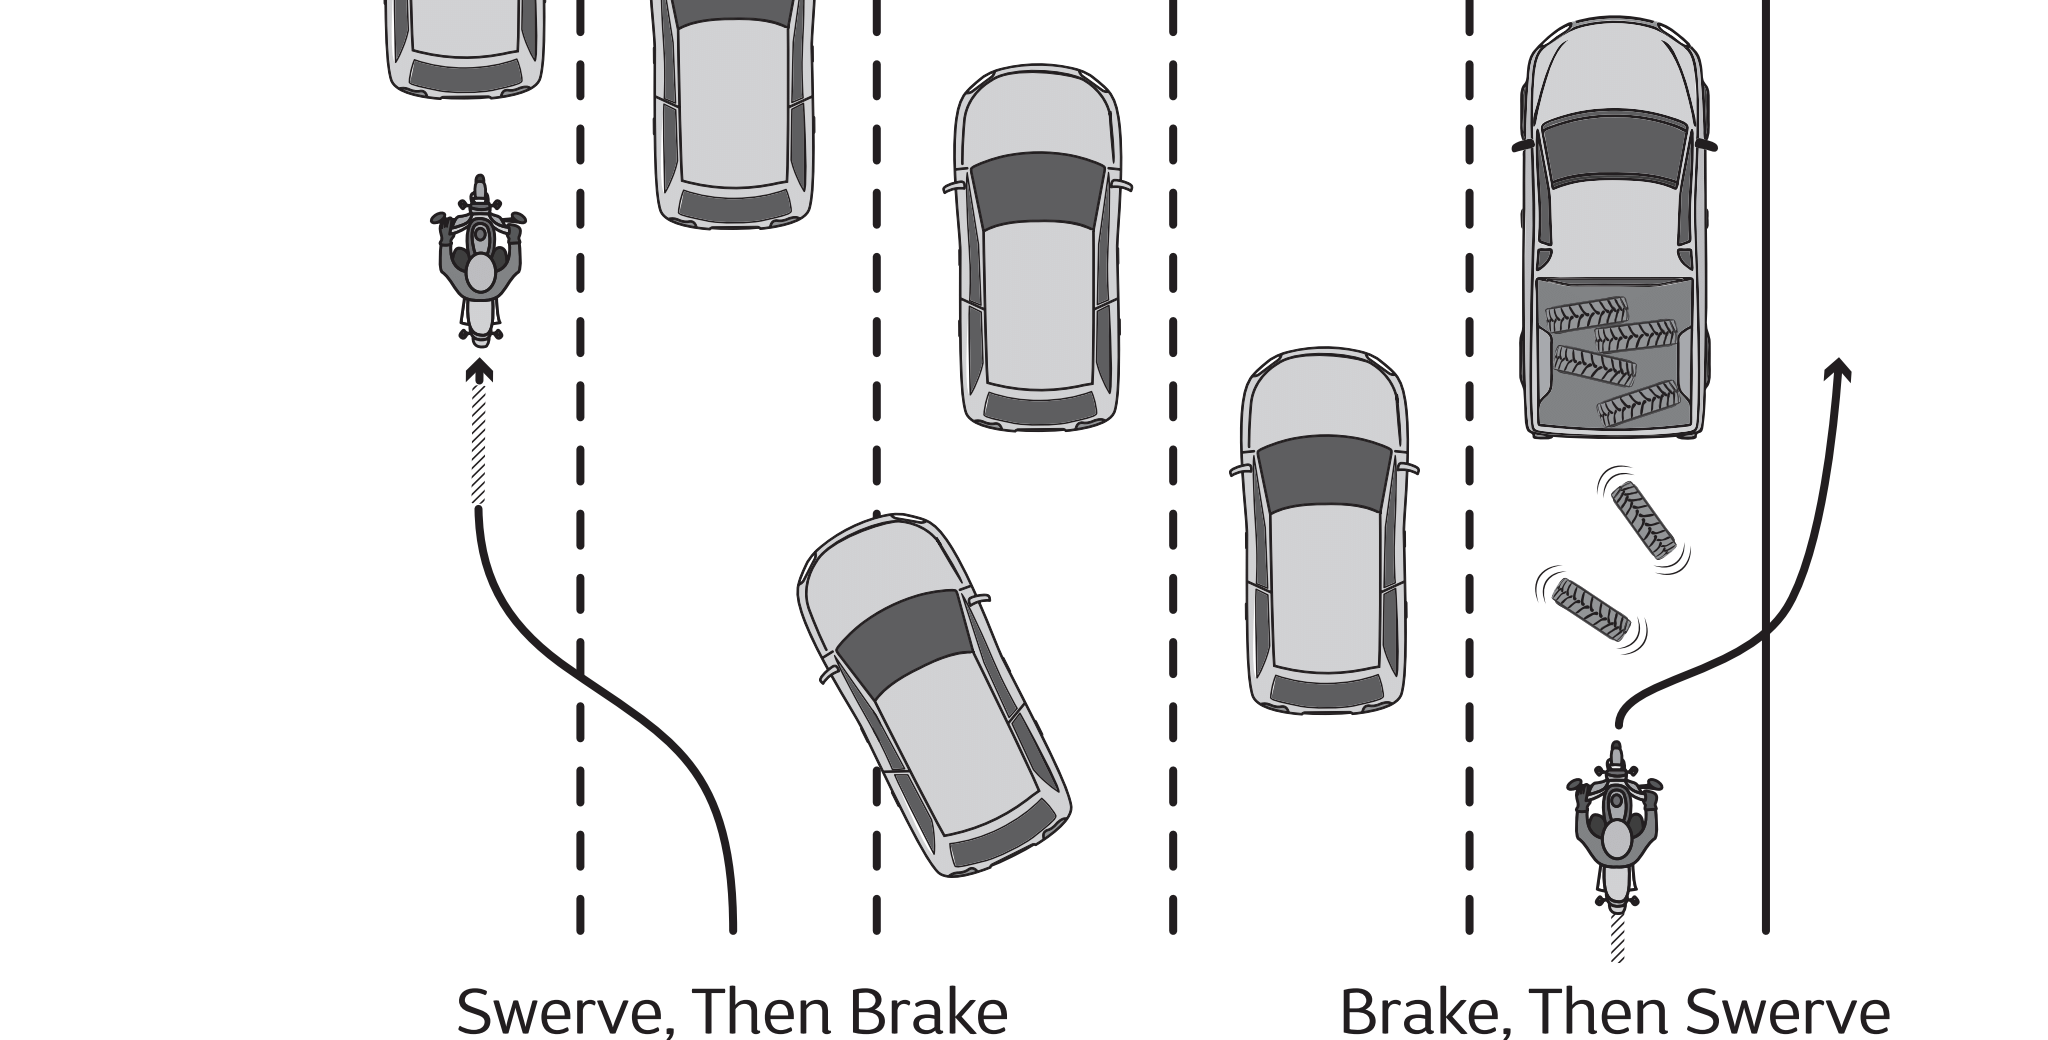 image of swerve then brake when on a motorcycle